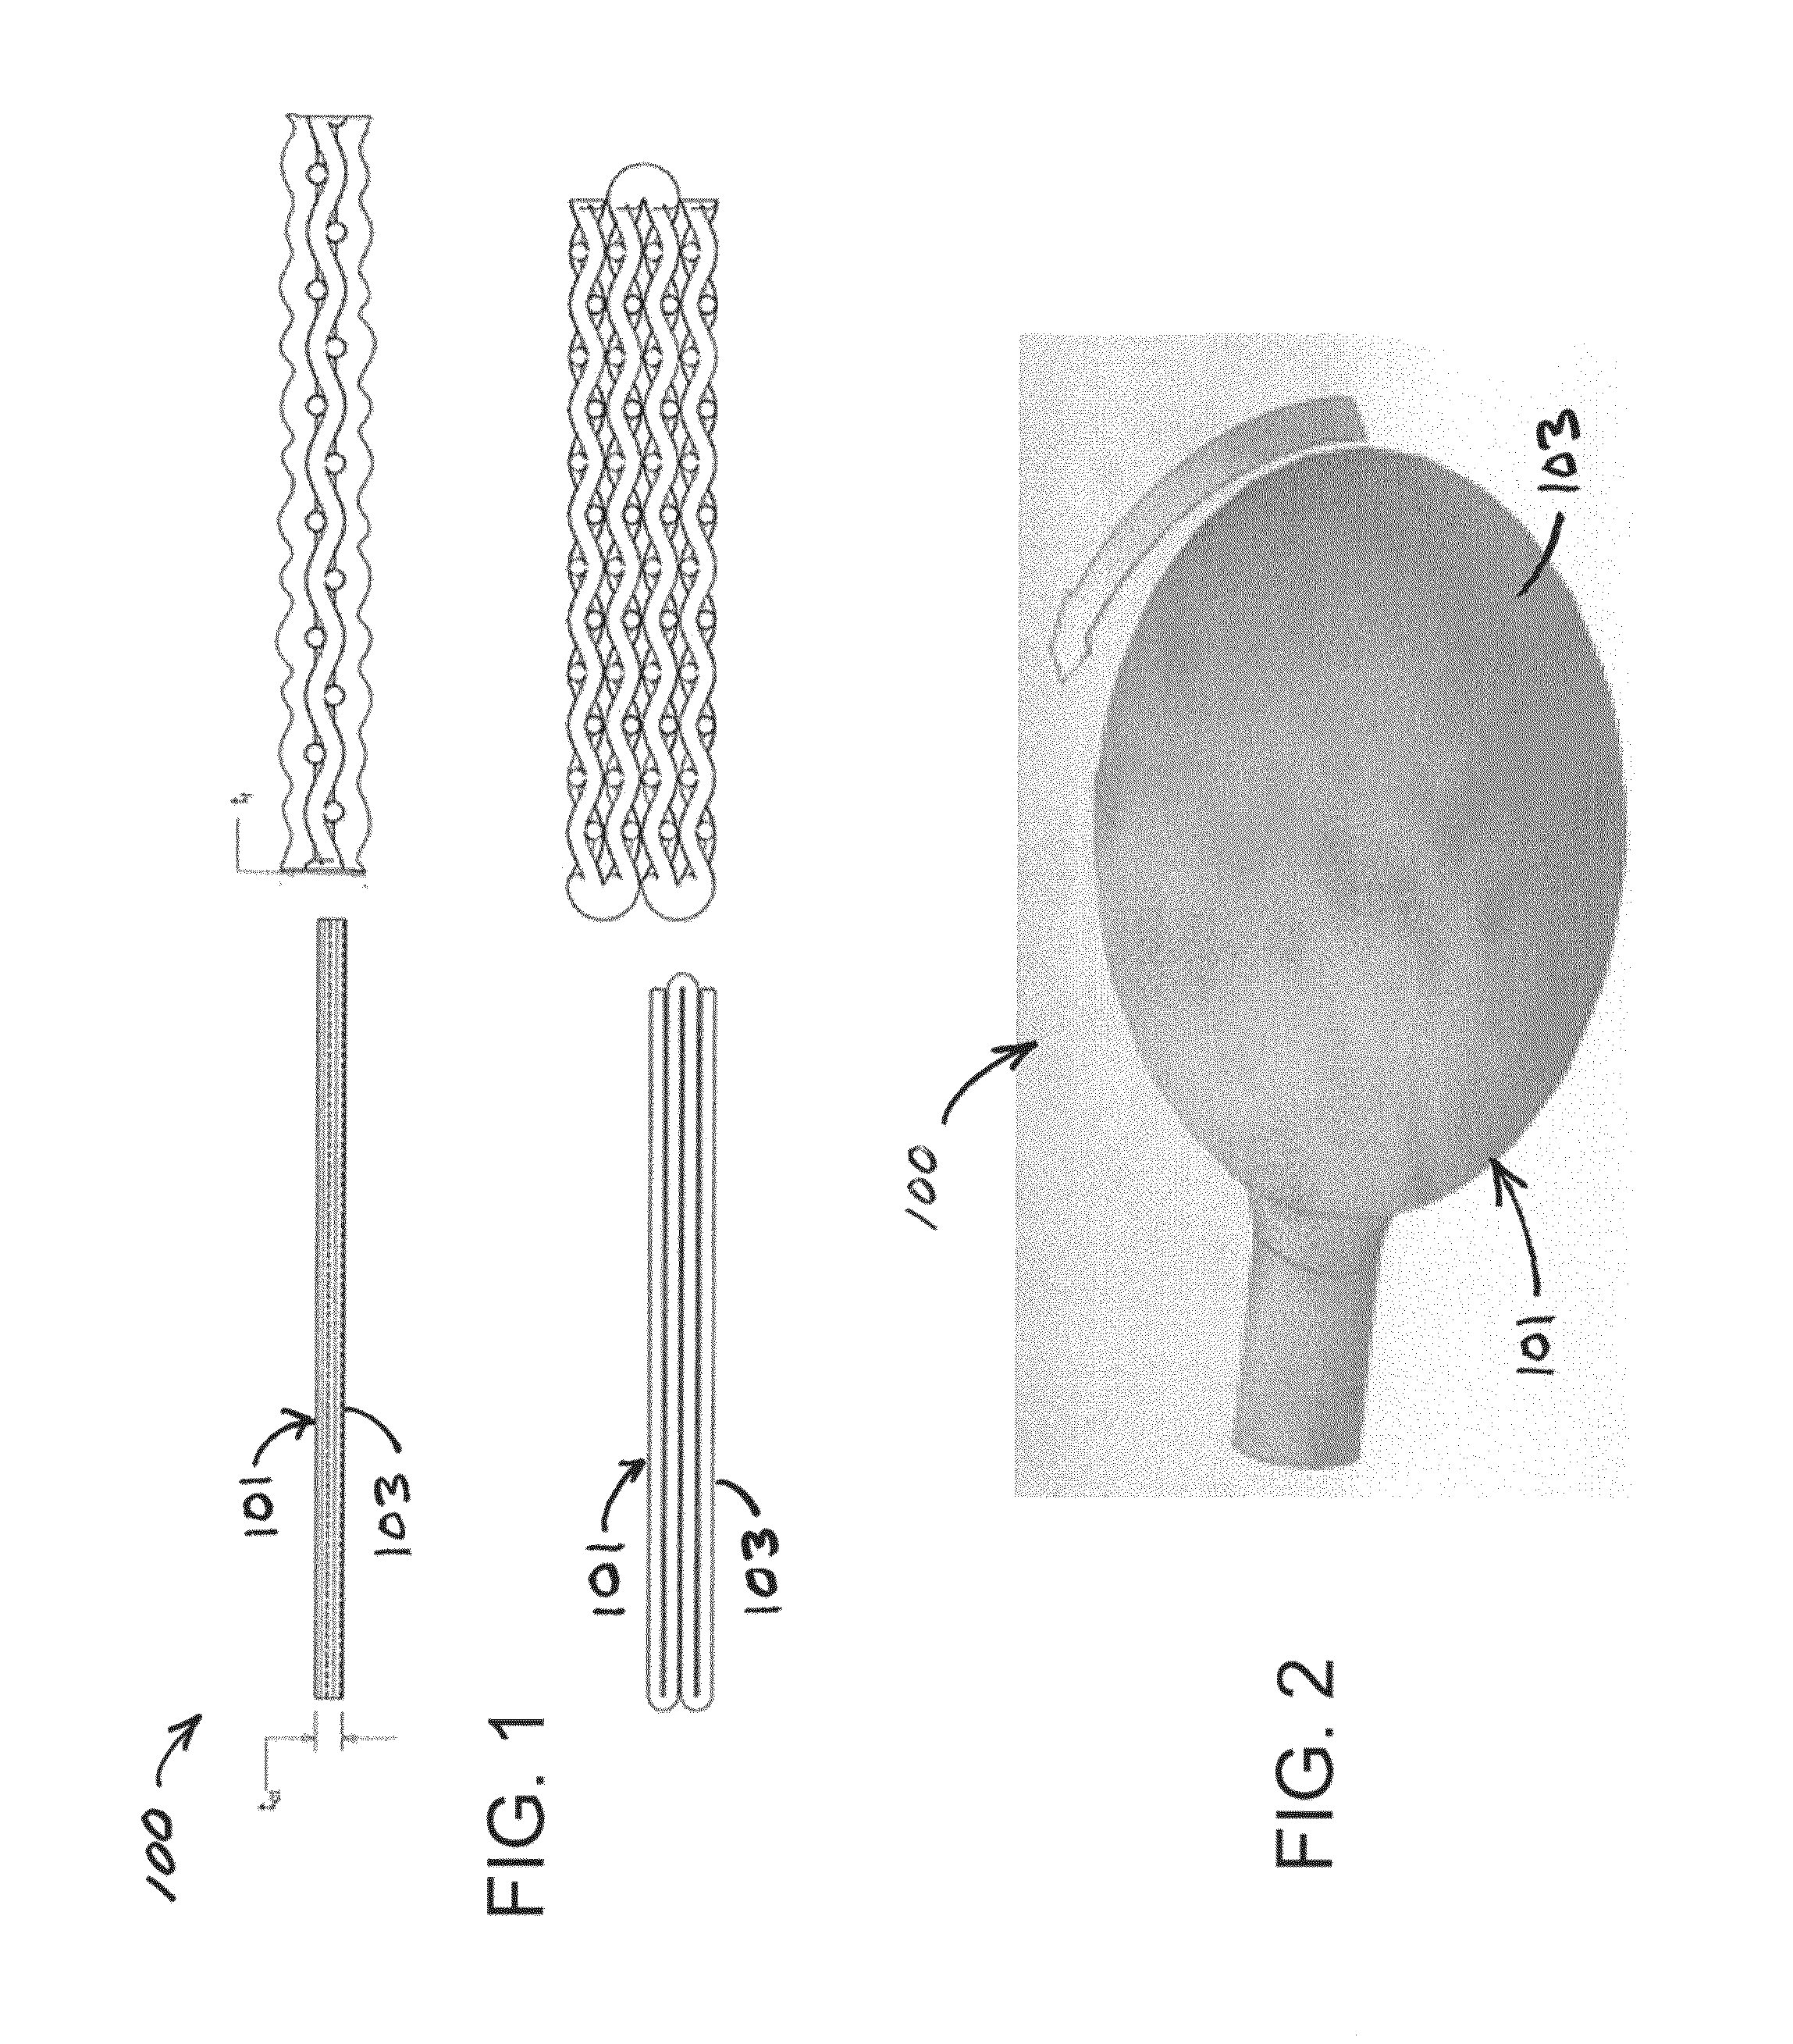 Systems and method for producing three-dimensional articles from flexible composite materials